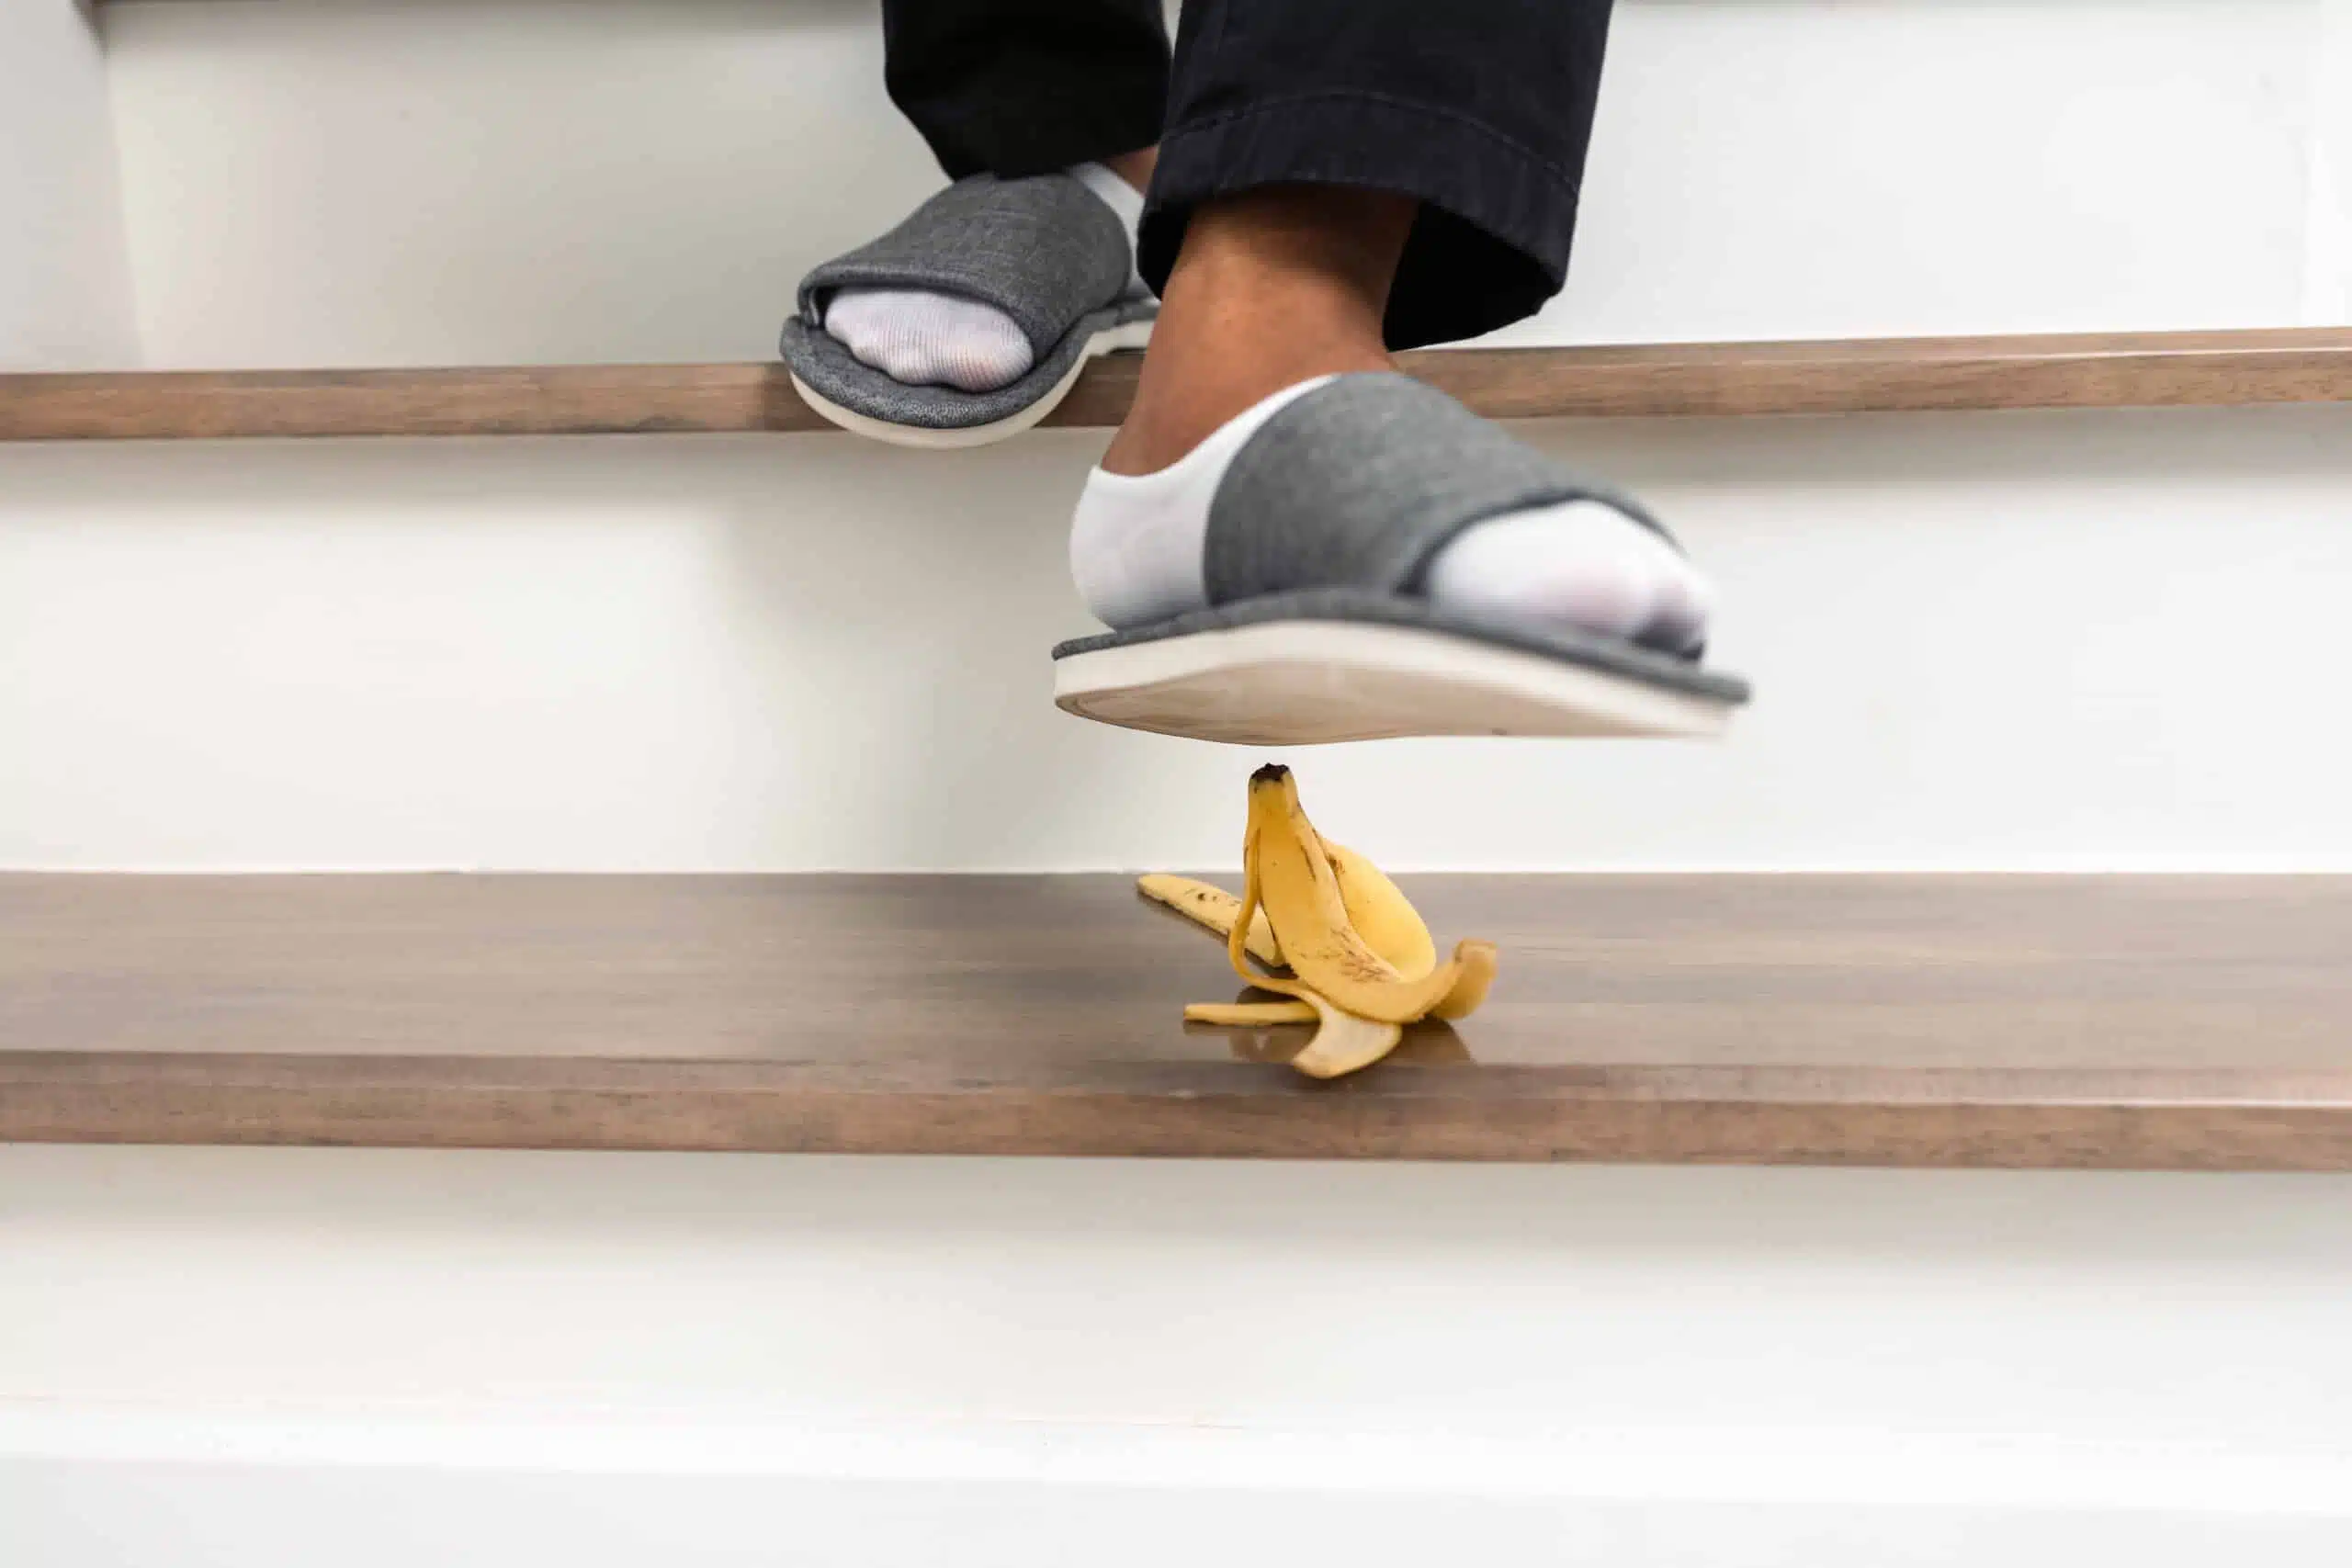 banana peel on slippery stair and foor standing on it causing a slip and fall injury